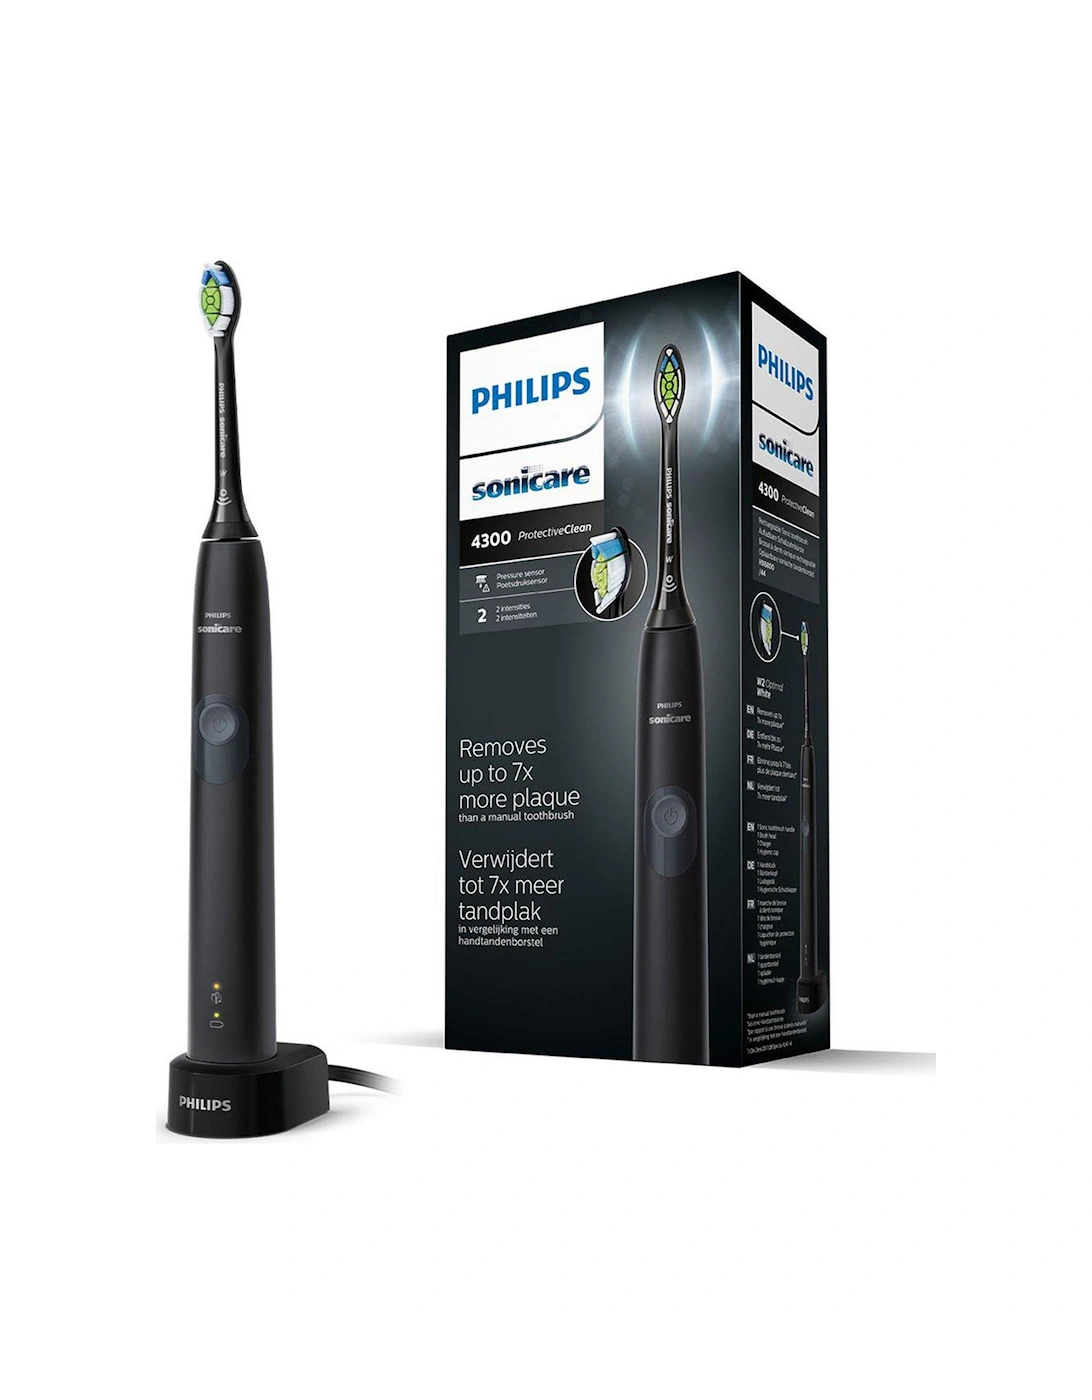 Sonicare Series 4300 ProtectiveClean Electric Toothbrush - Black HX6800/44, 2 of 1